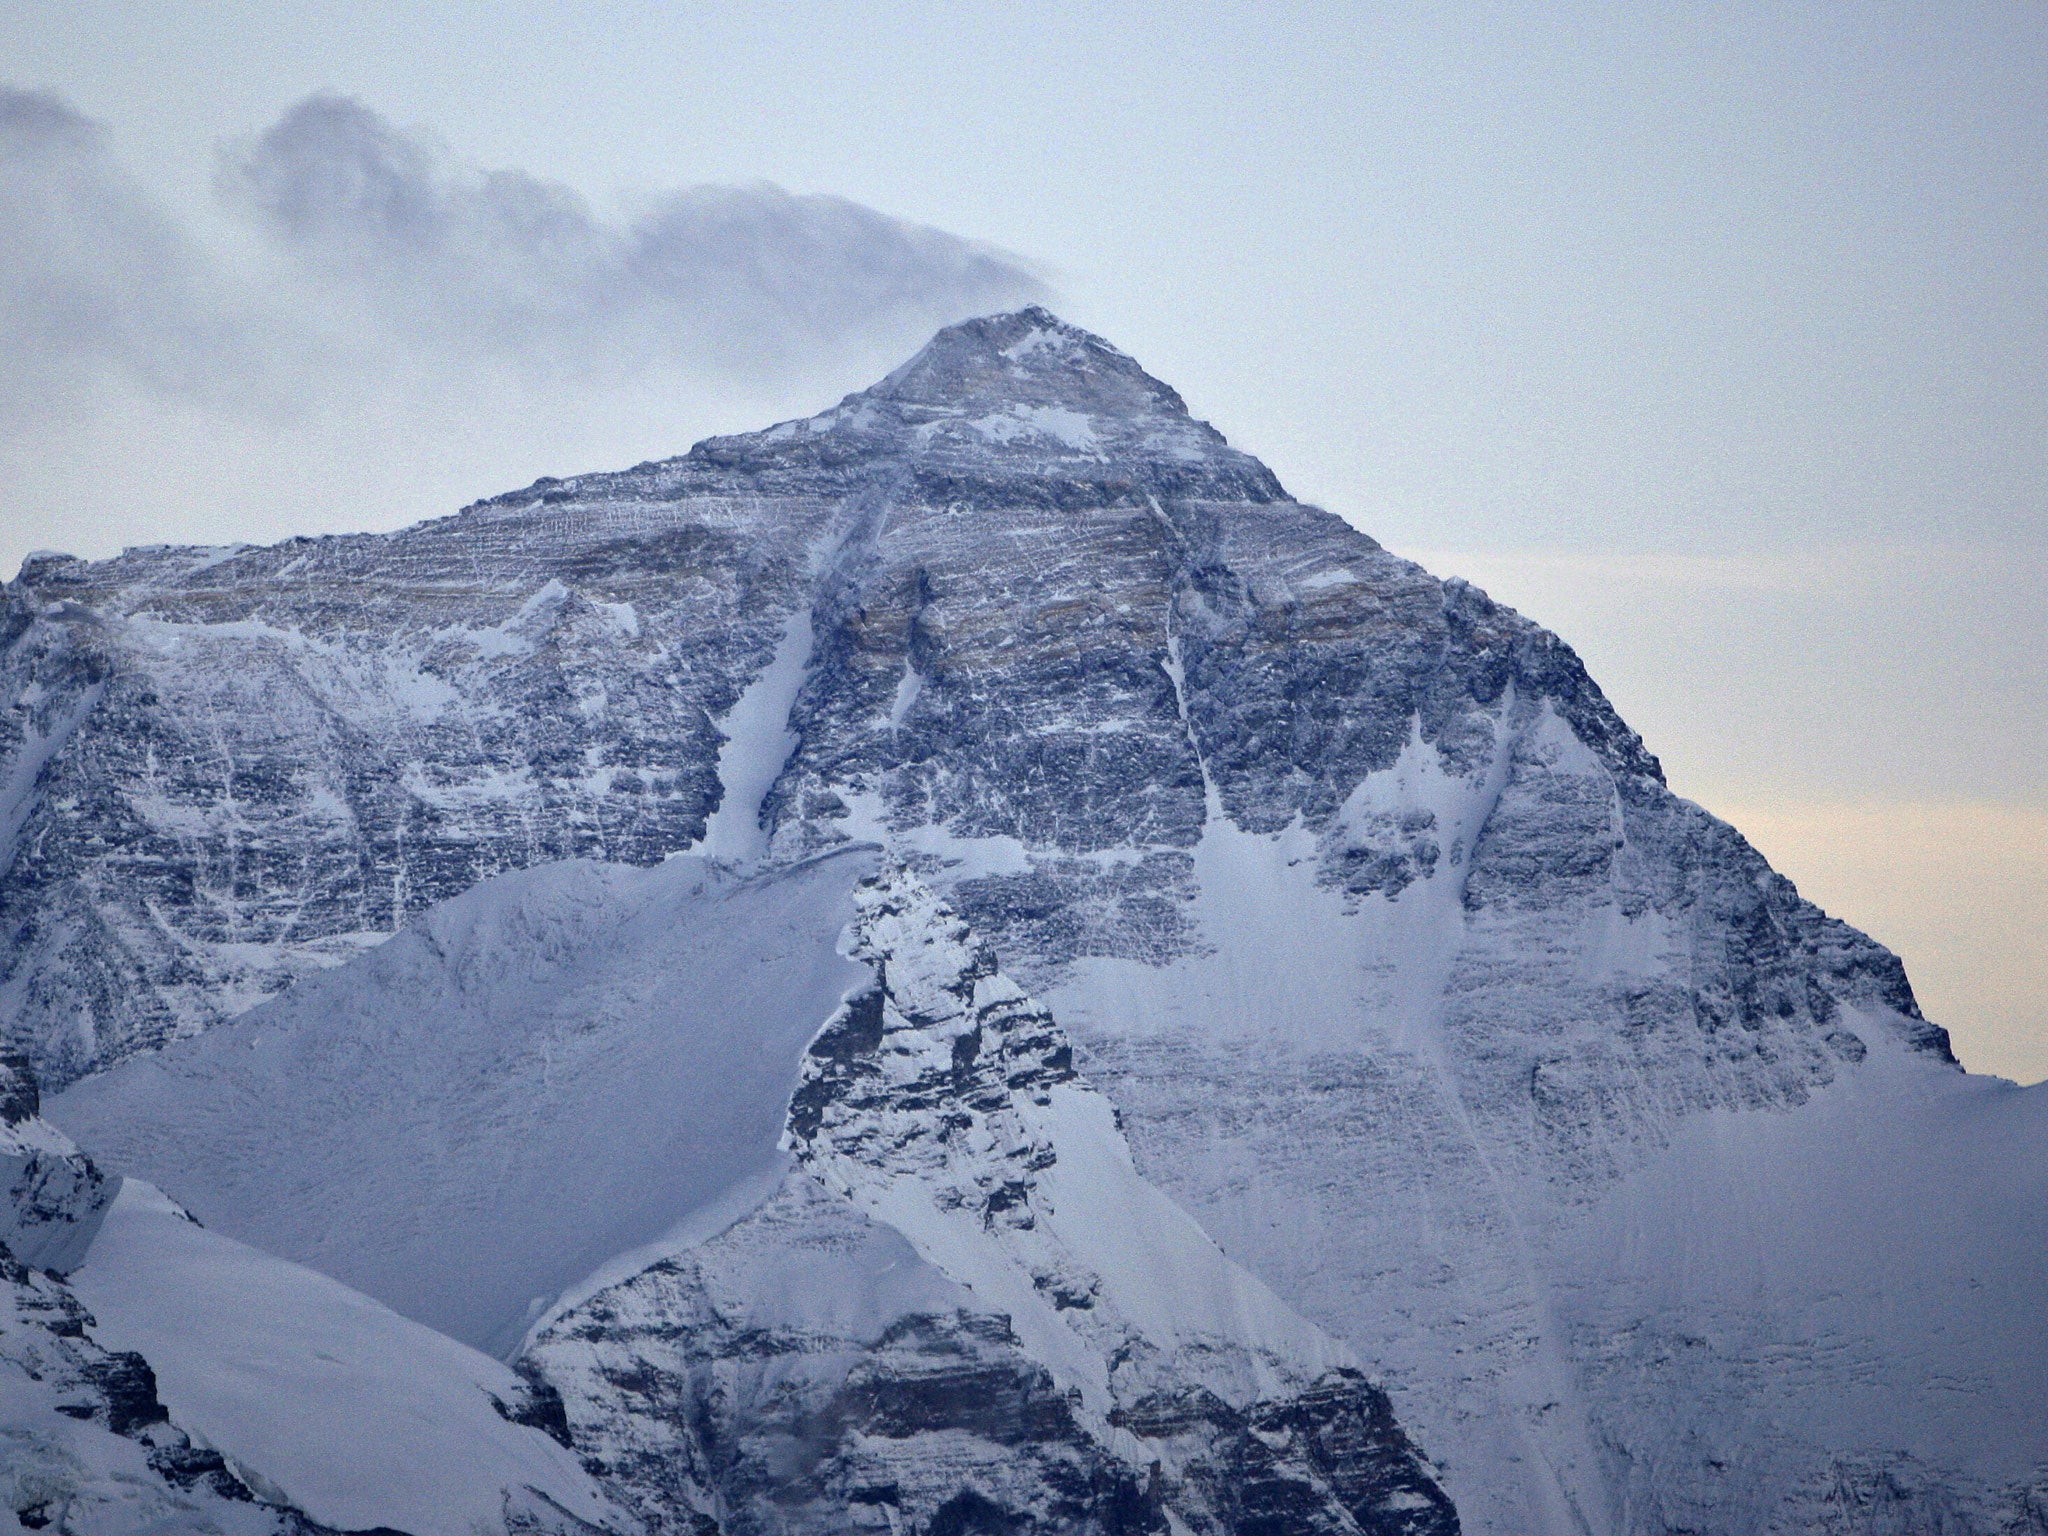 The nine-person team reached the summit of Mont Everest on Wednesday